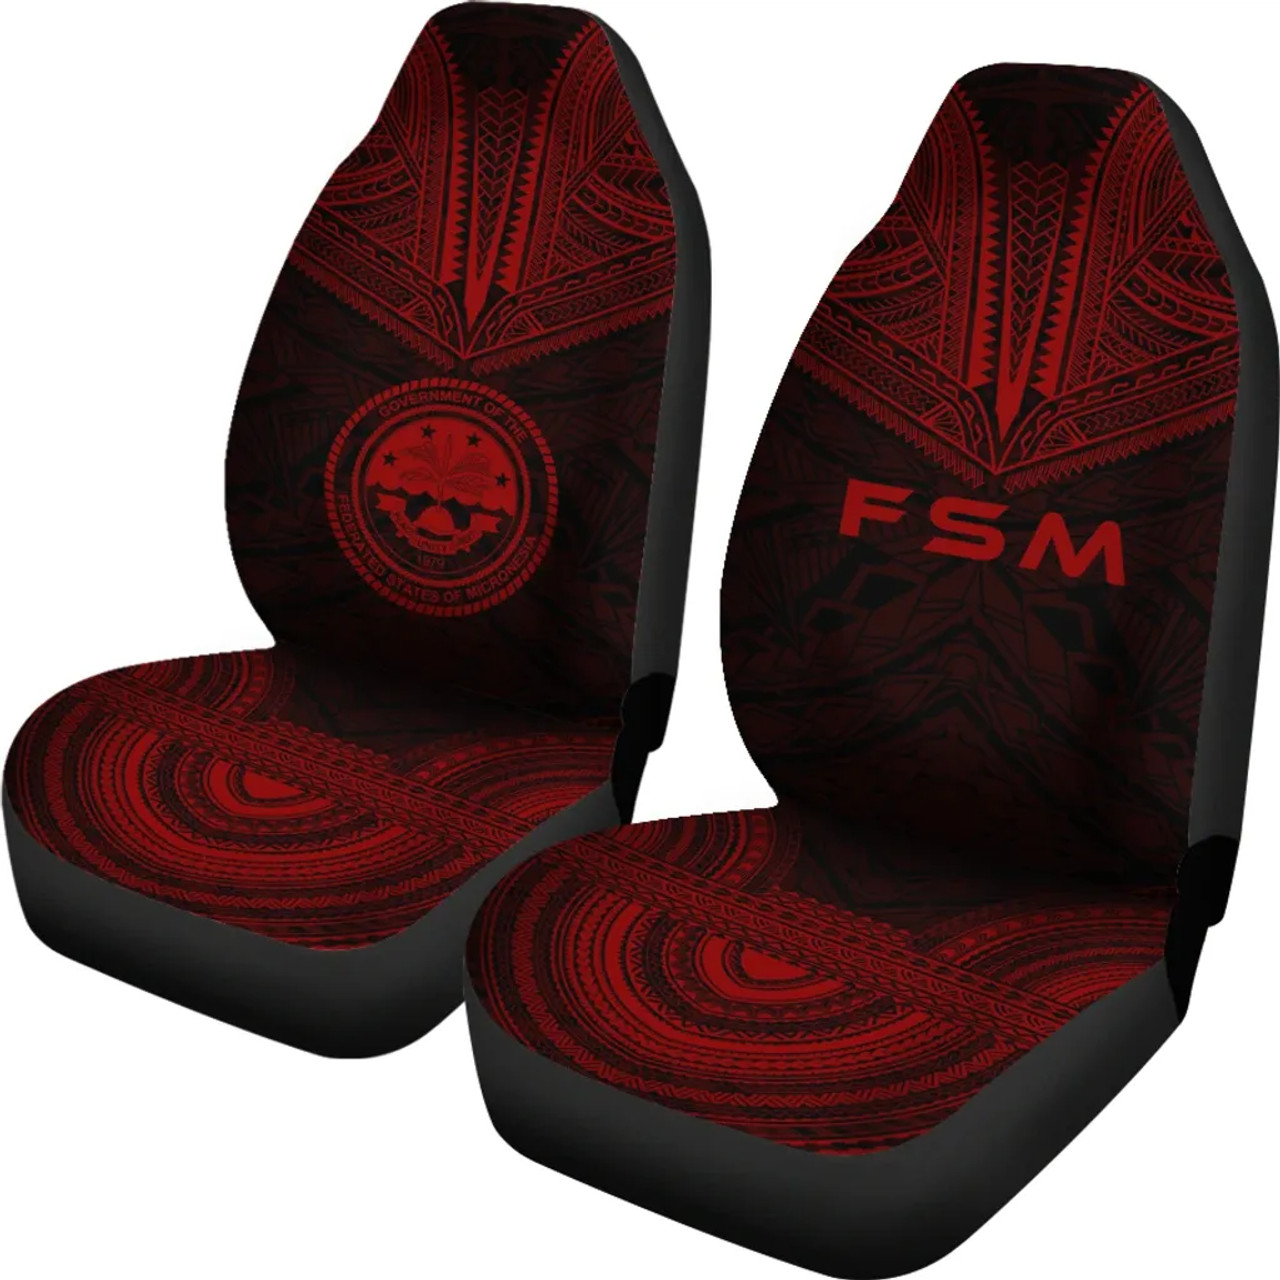 Federated States Of Micronesia Car Seat Cover - FSM Seal Polynesian Chief Tattoo Red Version